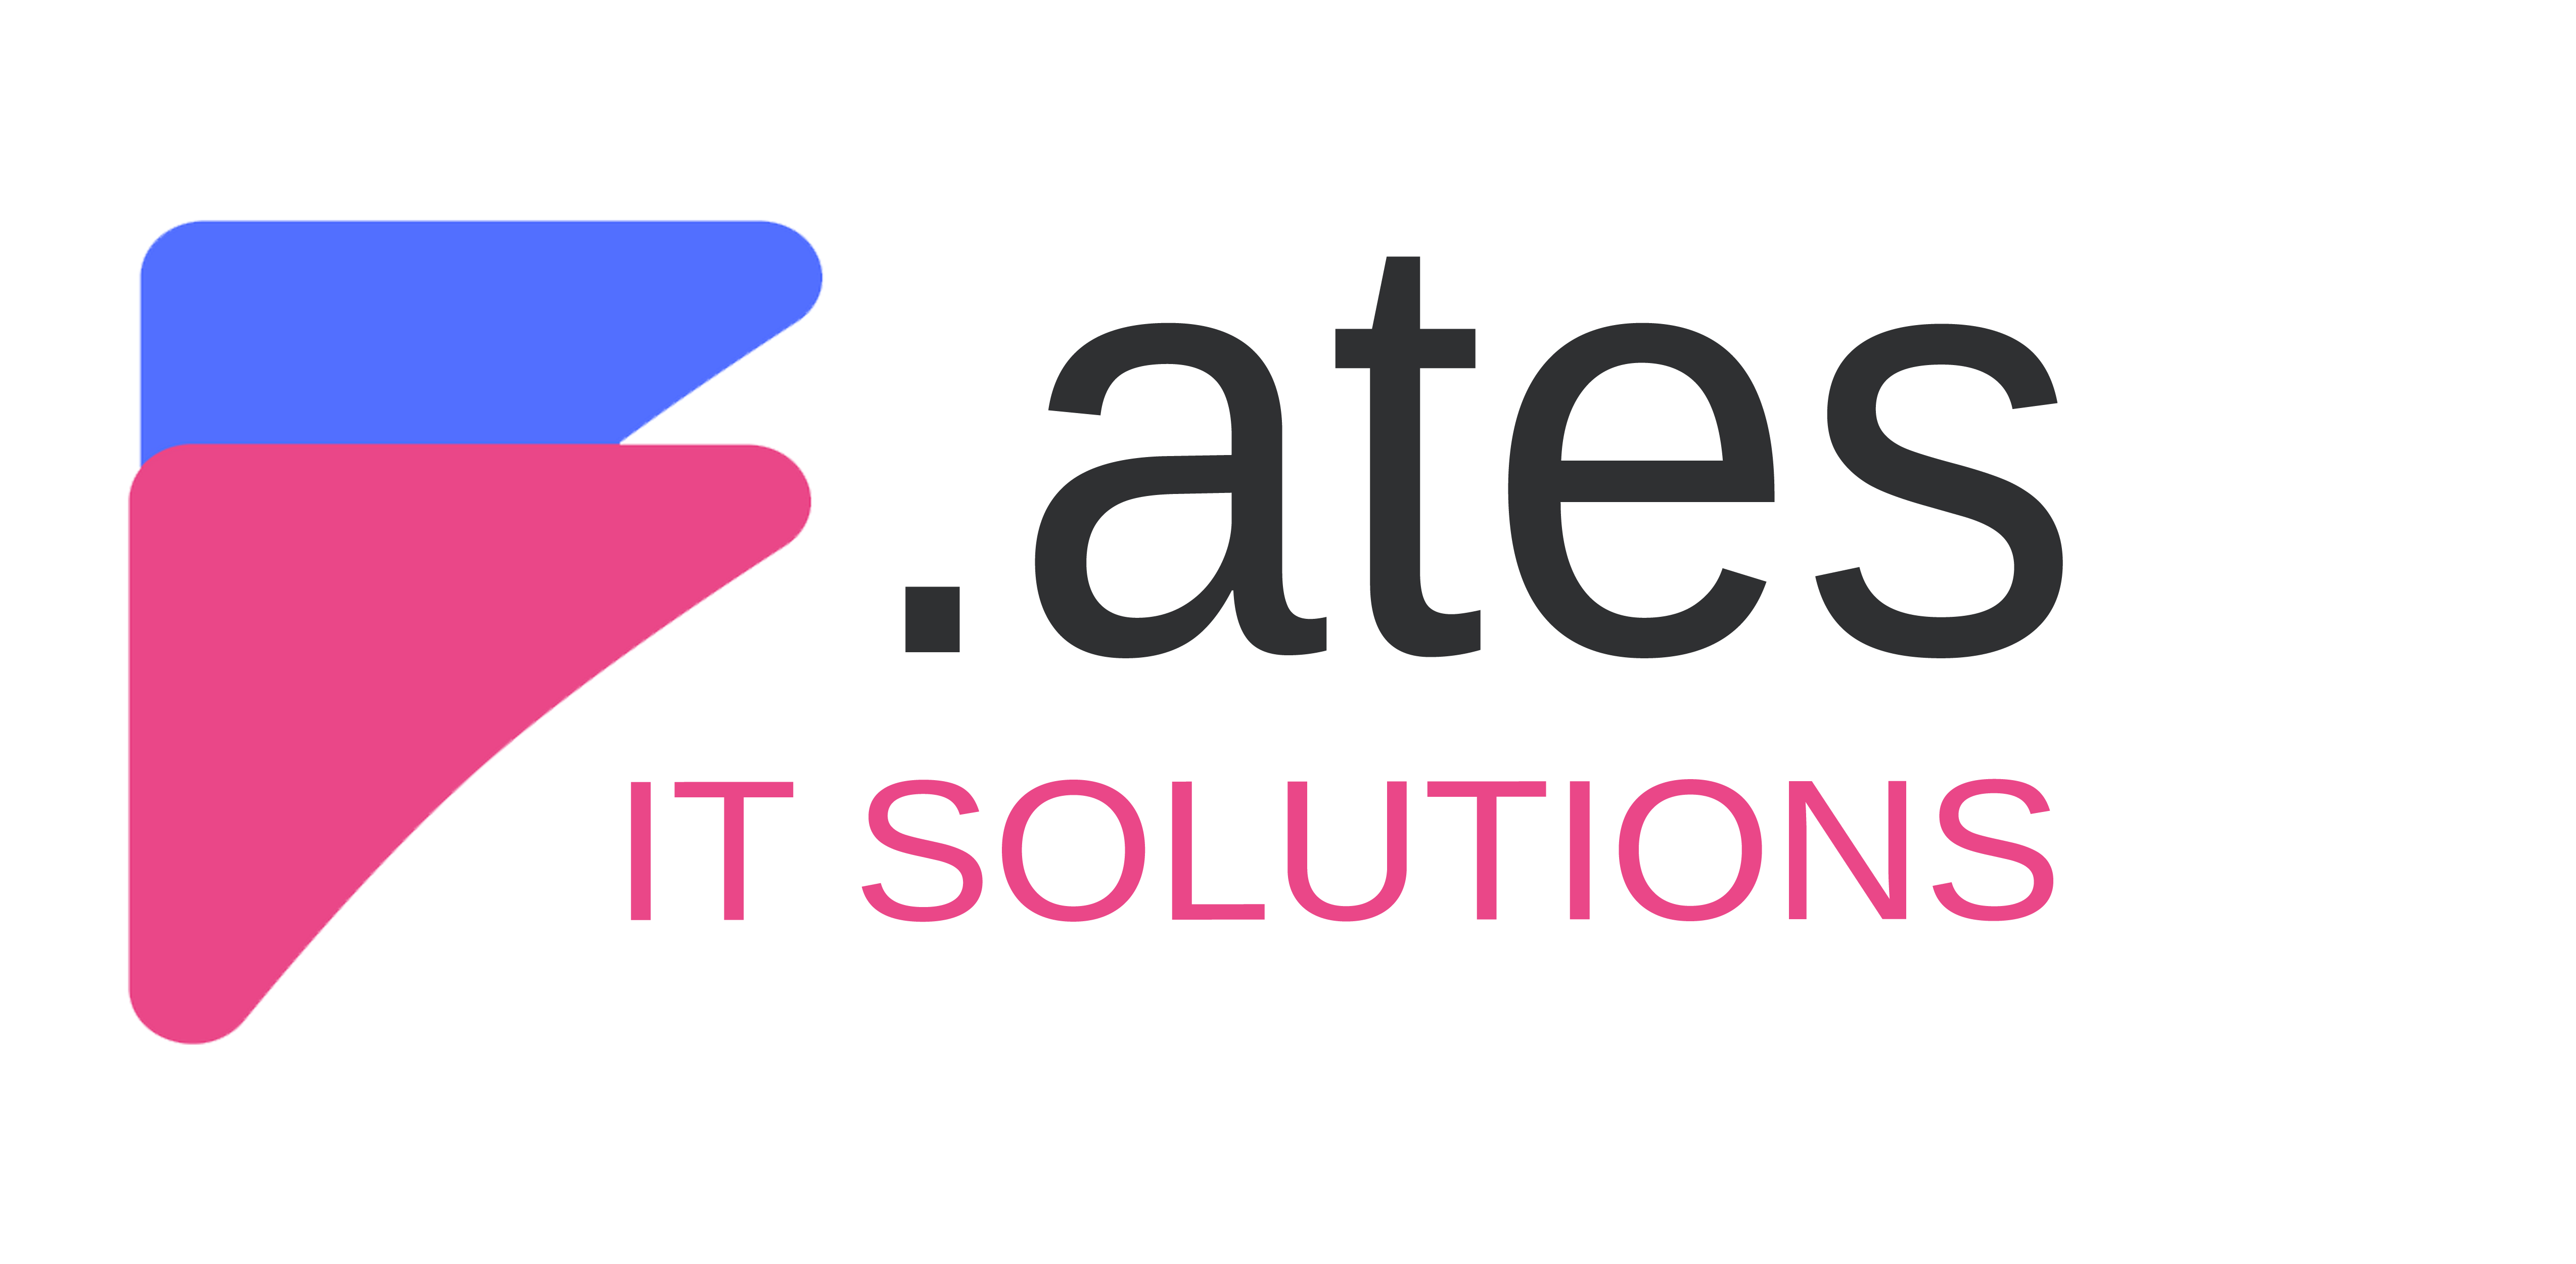 ATES IT SOLUTIONS LTD. profile on Qualified.One